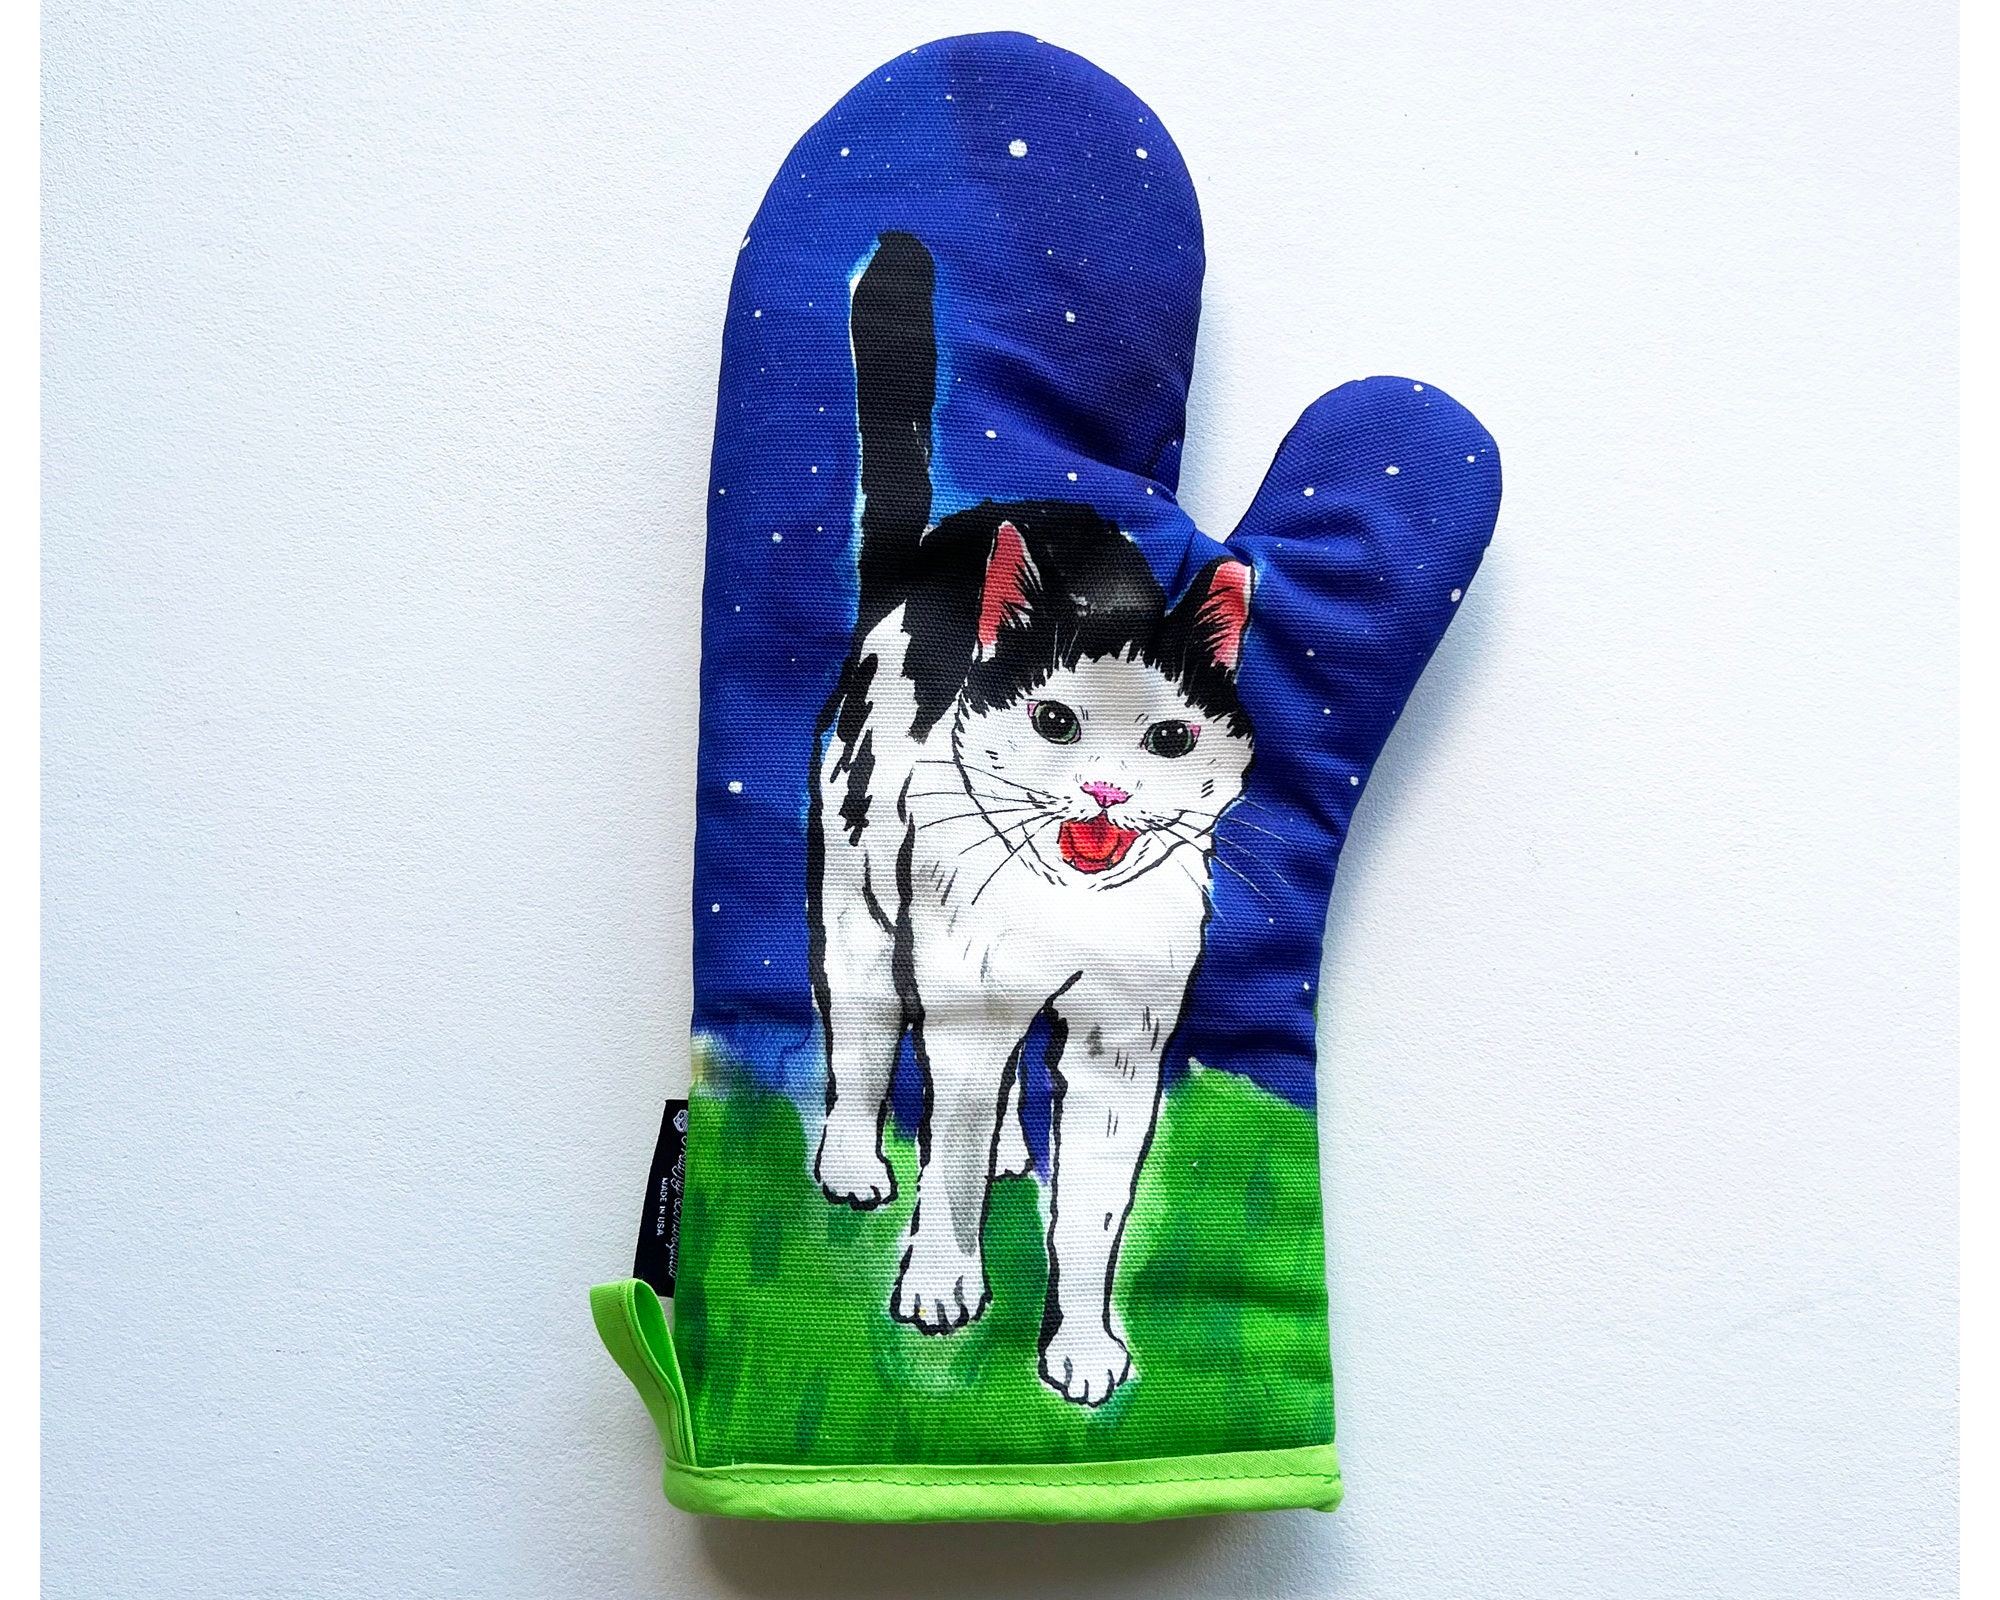 Kitty Cat on Red Oven Mitt with message, Made From Scratch